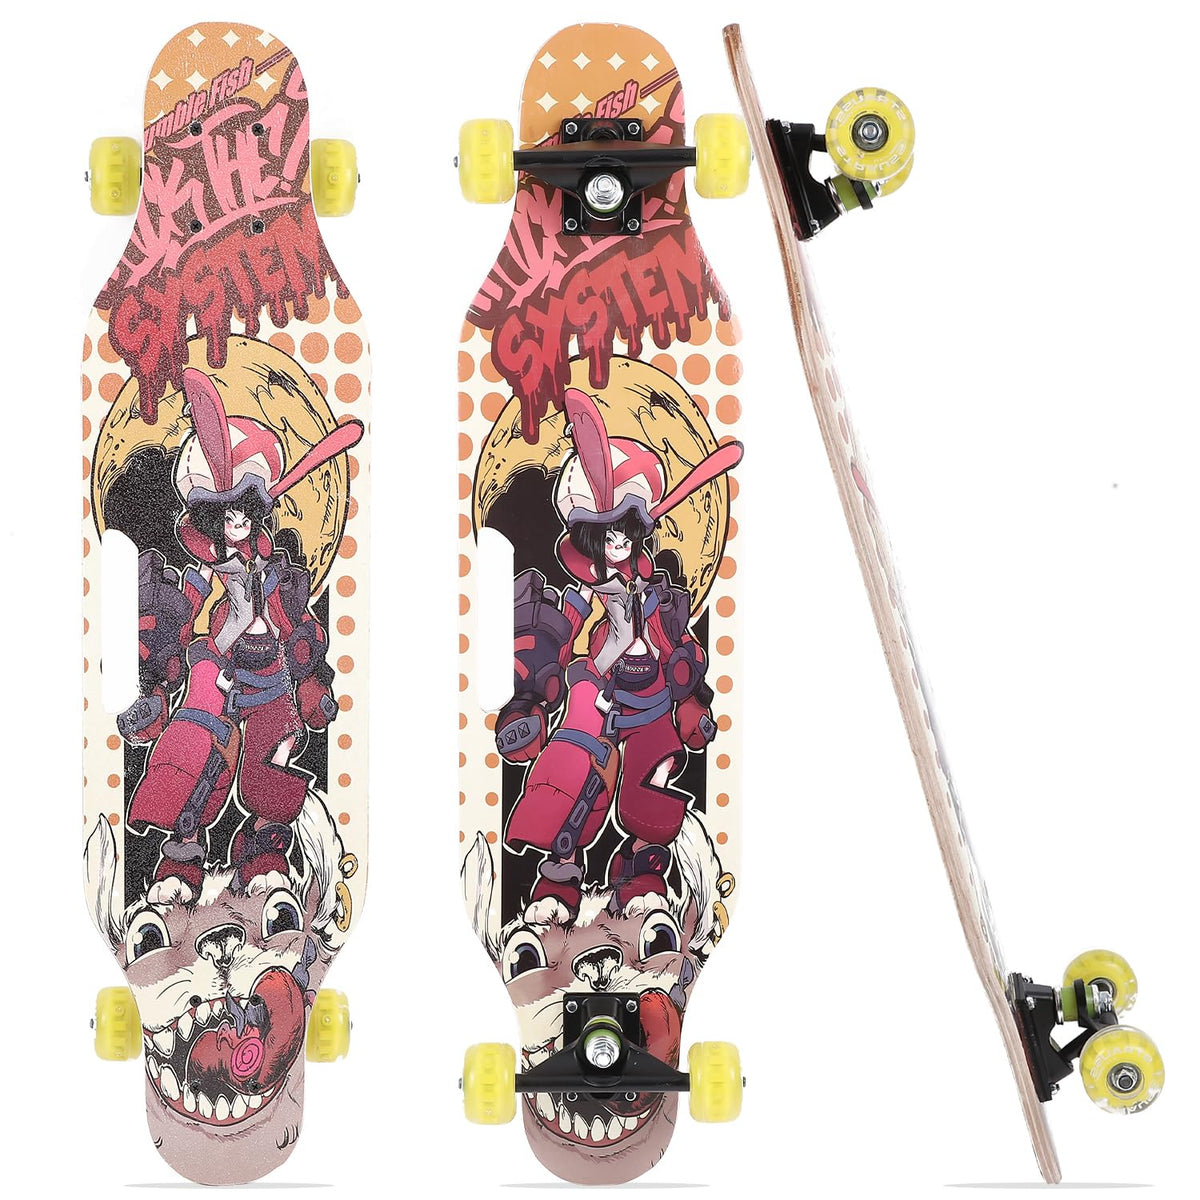 STRAUSS Spunkz Skateboard | Penny Skateboard/Casterboard/Hoverboard | Anti-Skid Board with High Precision Bearings | Wheels with Light |Ideal for All Skill Level (31.4 X 8 Inch), (Warrior)